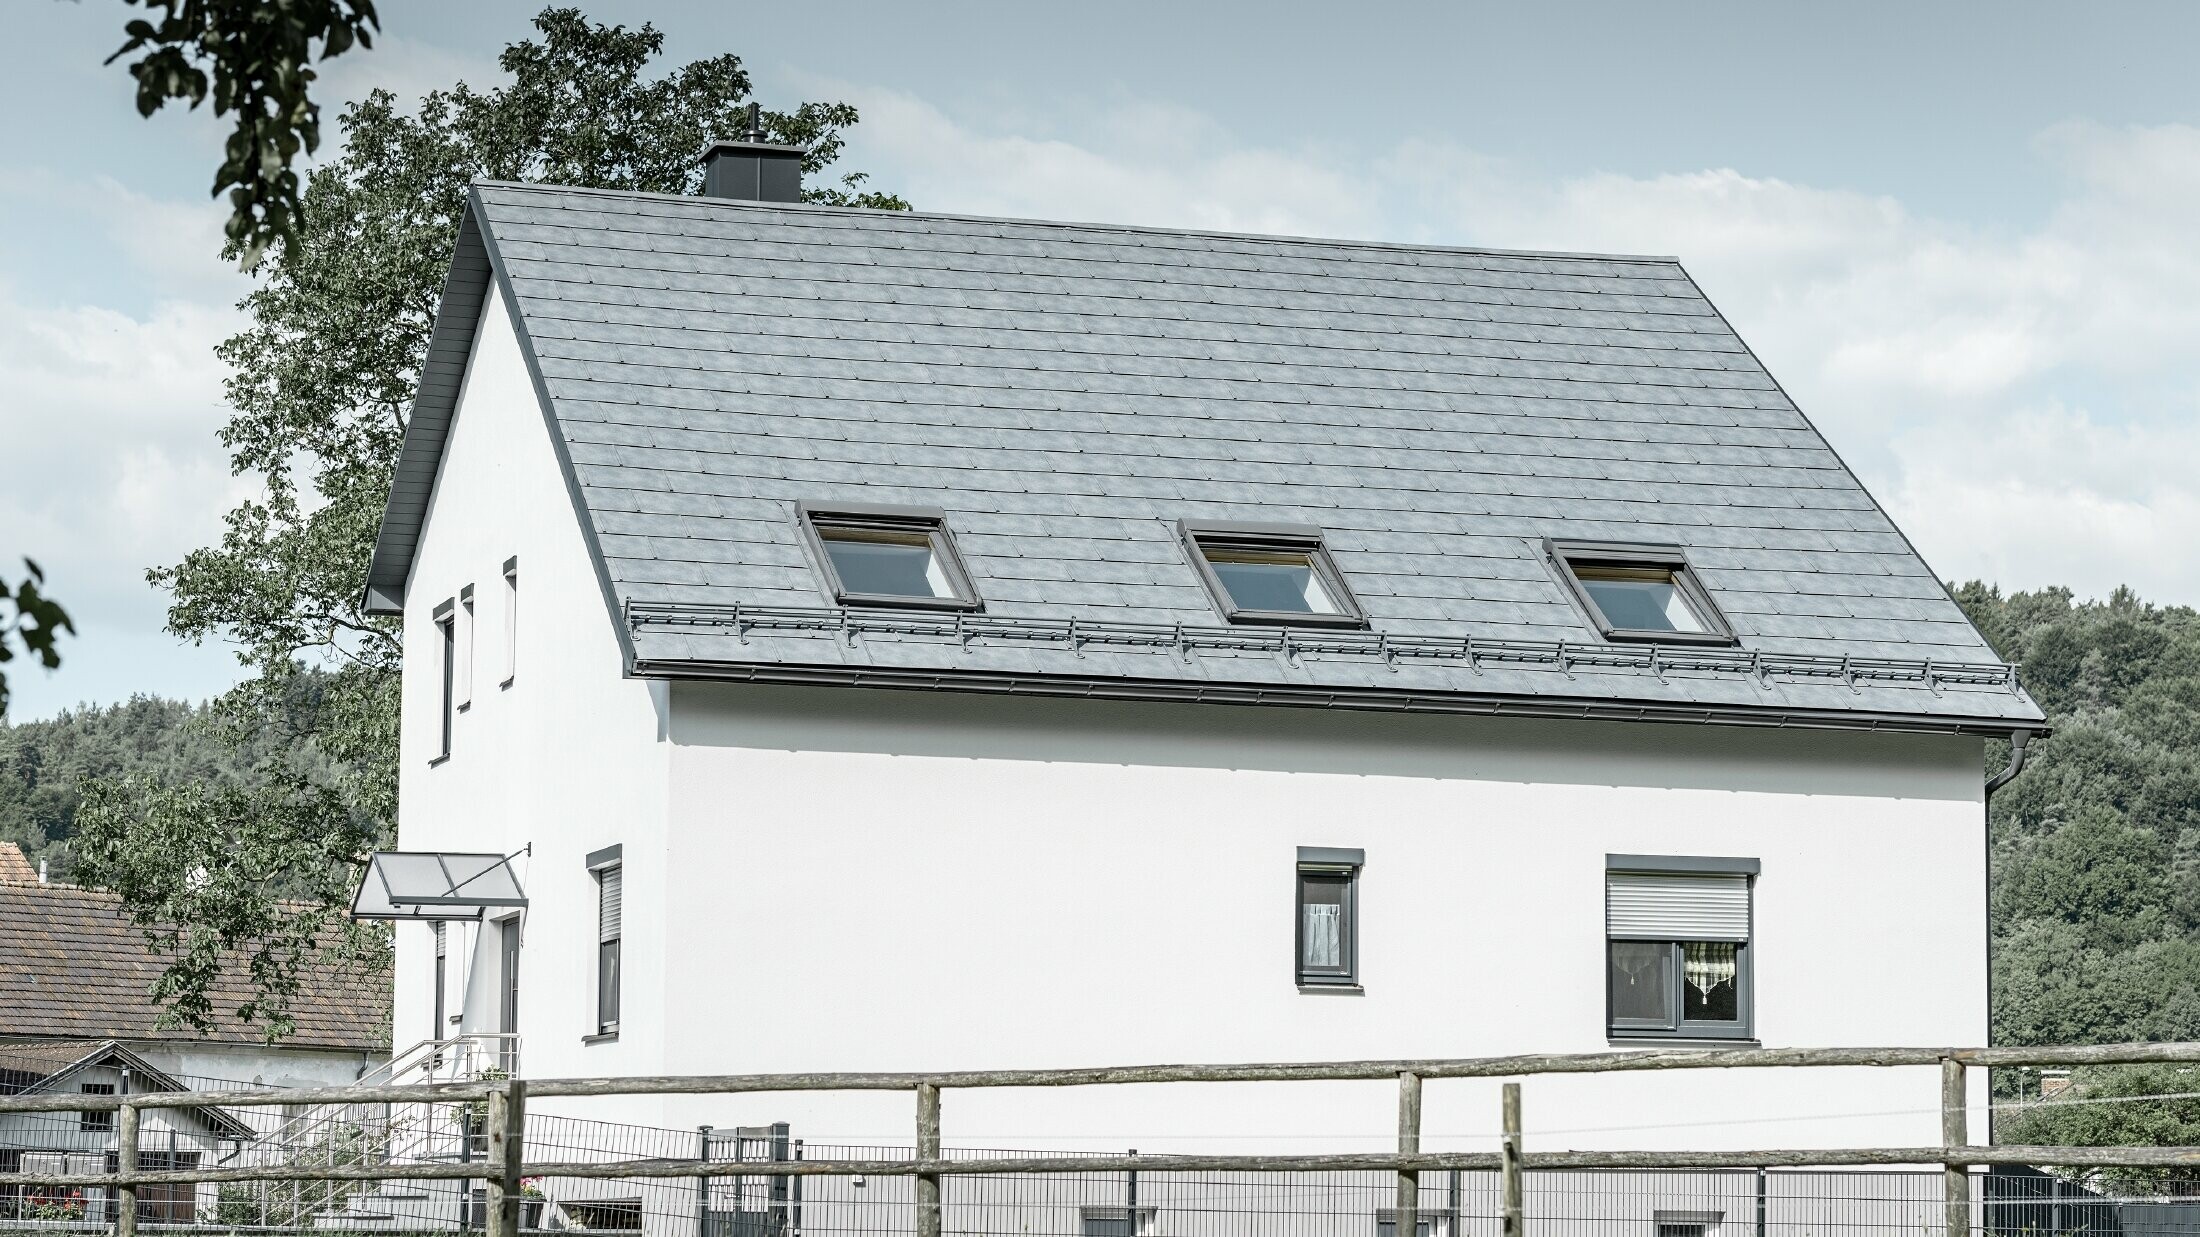 The gabled roof of the classic detached house was covered with the new PREFA R.16 roof tile in stone grey. Three roof windows were inserted in the roof area and snow guards were installed. The façade is kept simple in white.